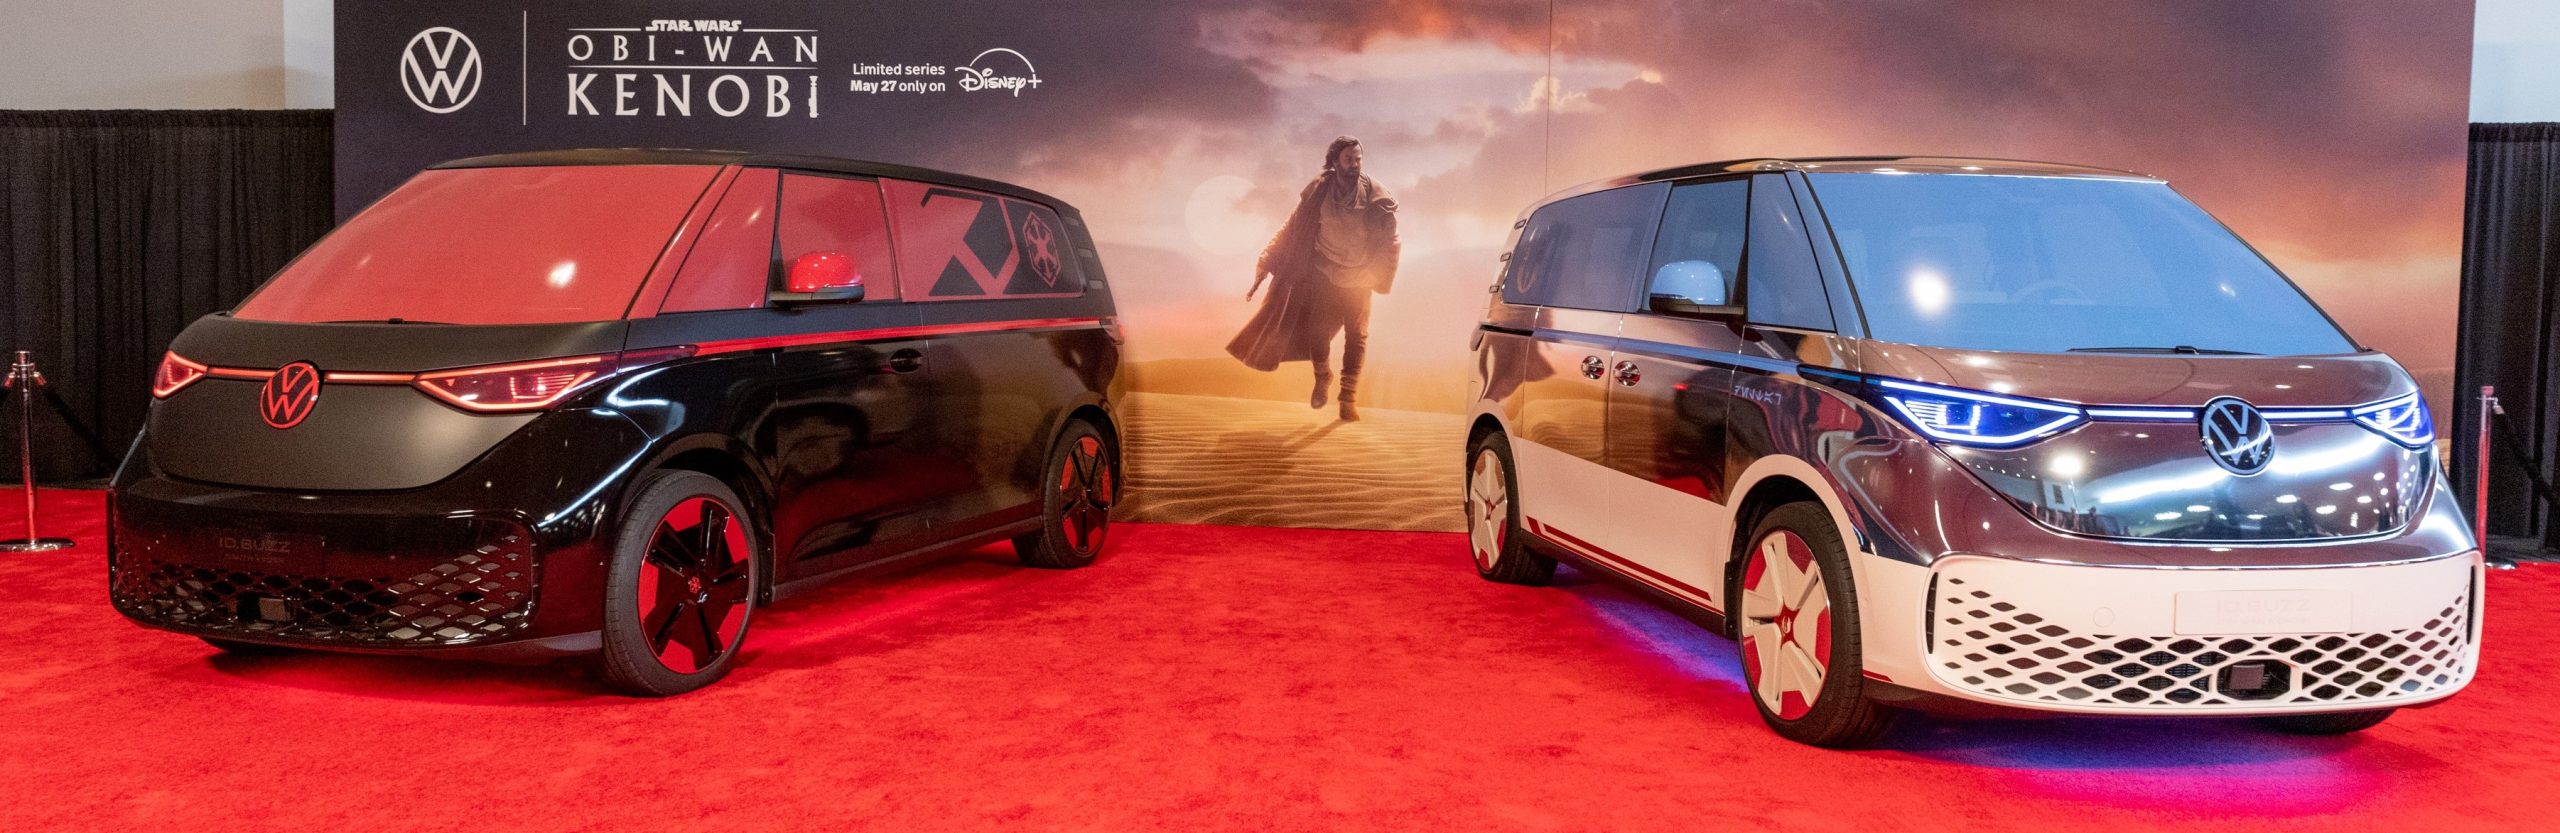 Volkswagen launches electrifying collaboration with Marvel Studios